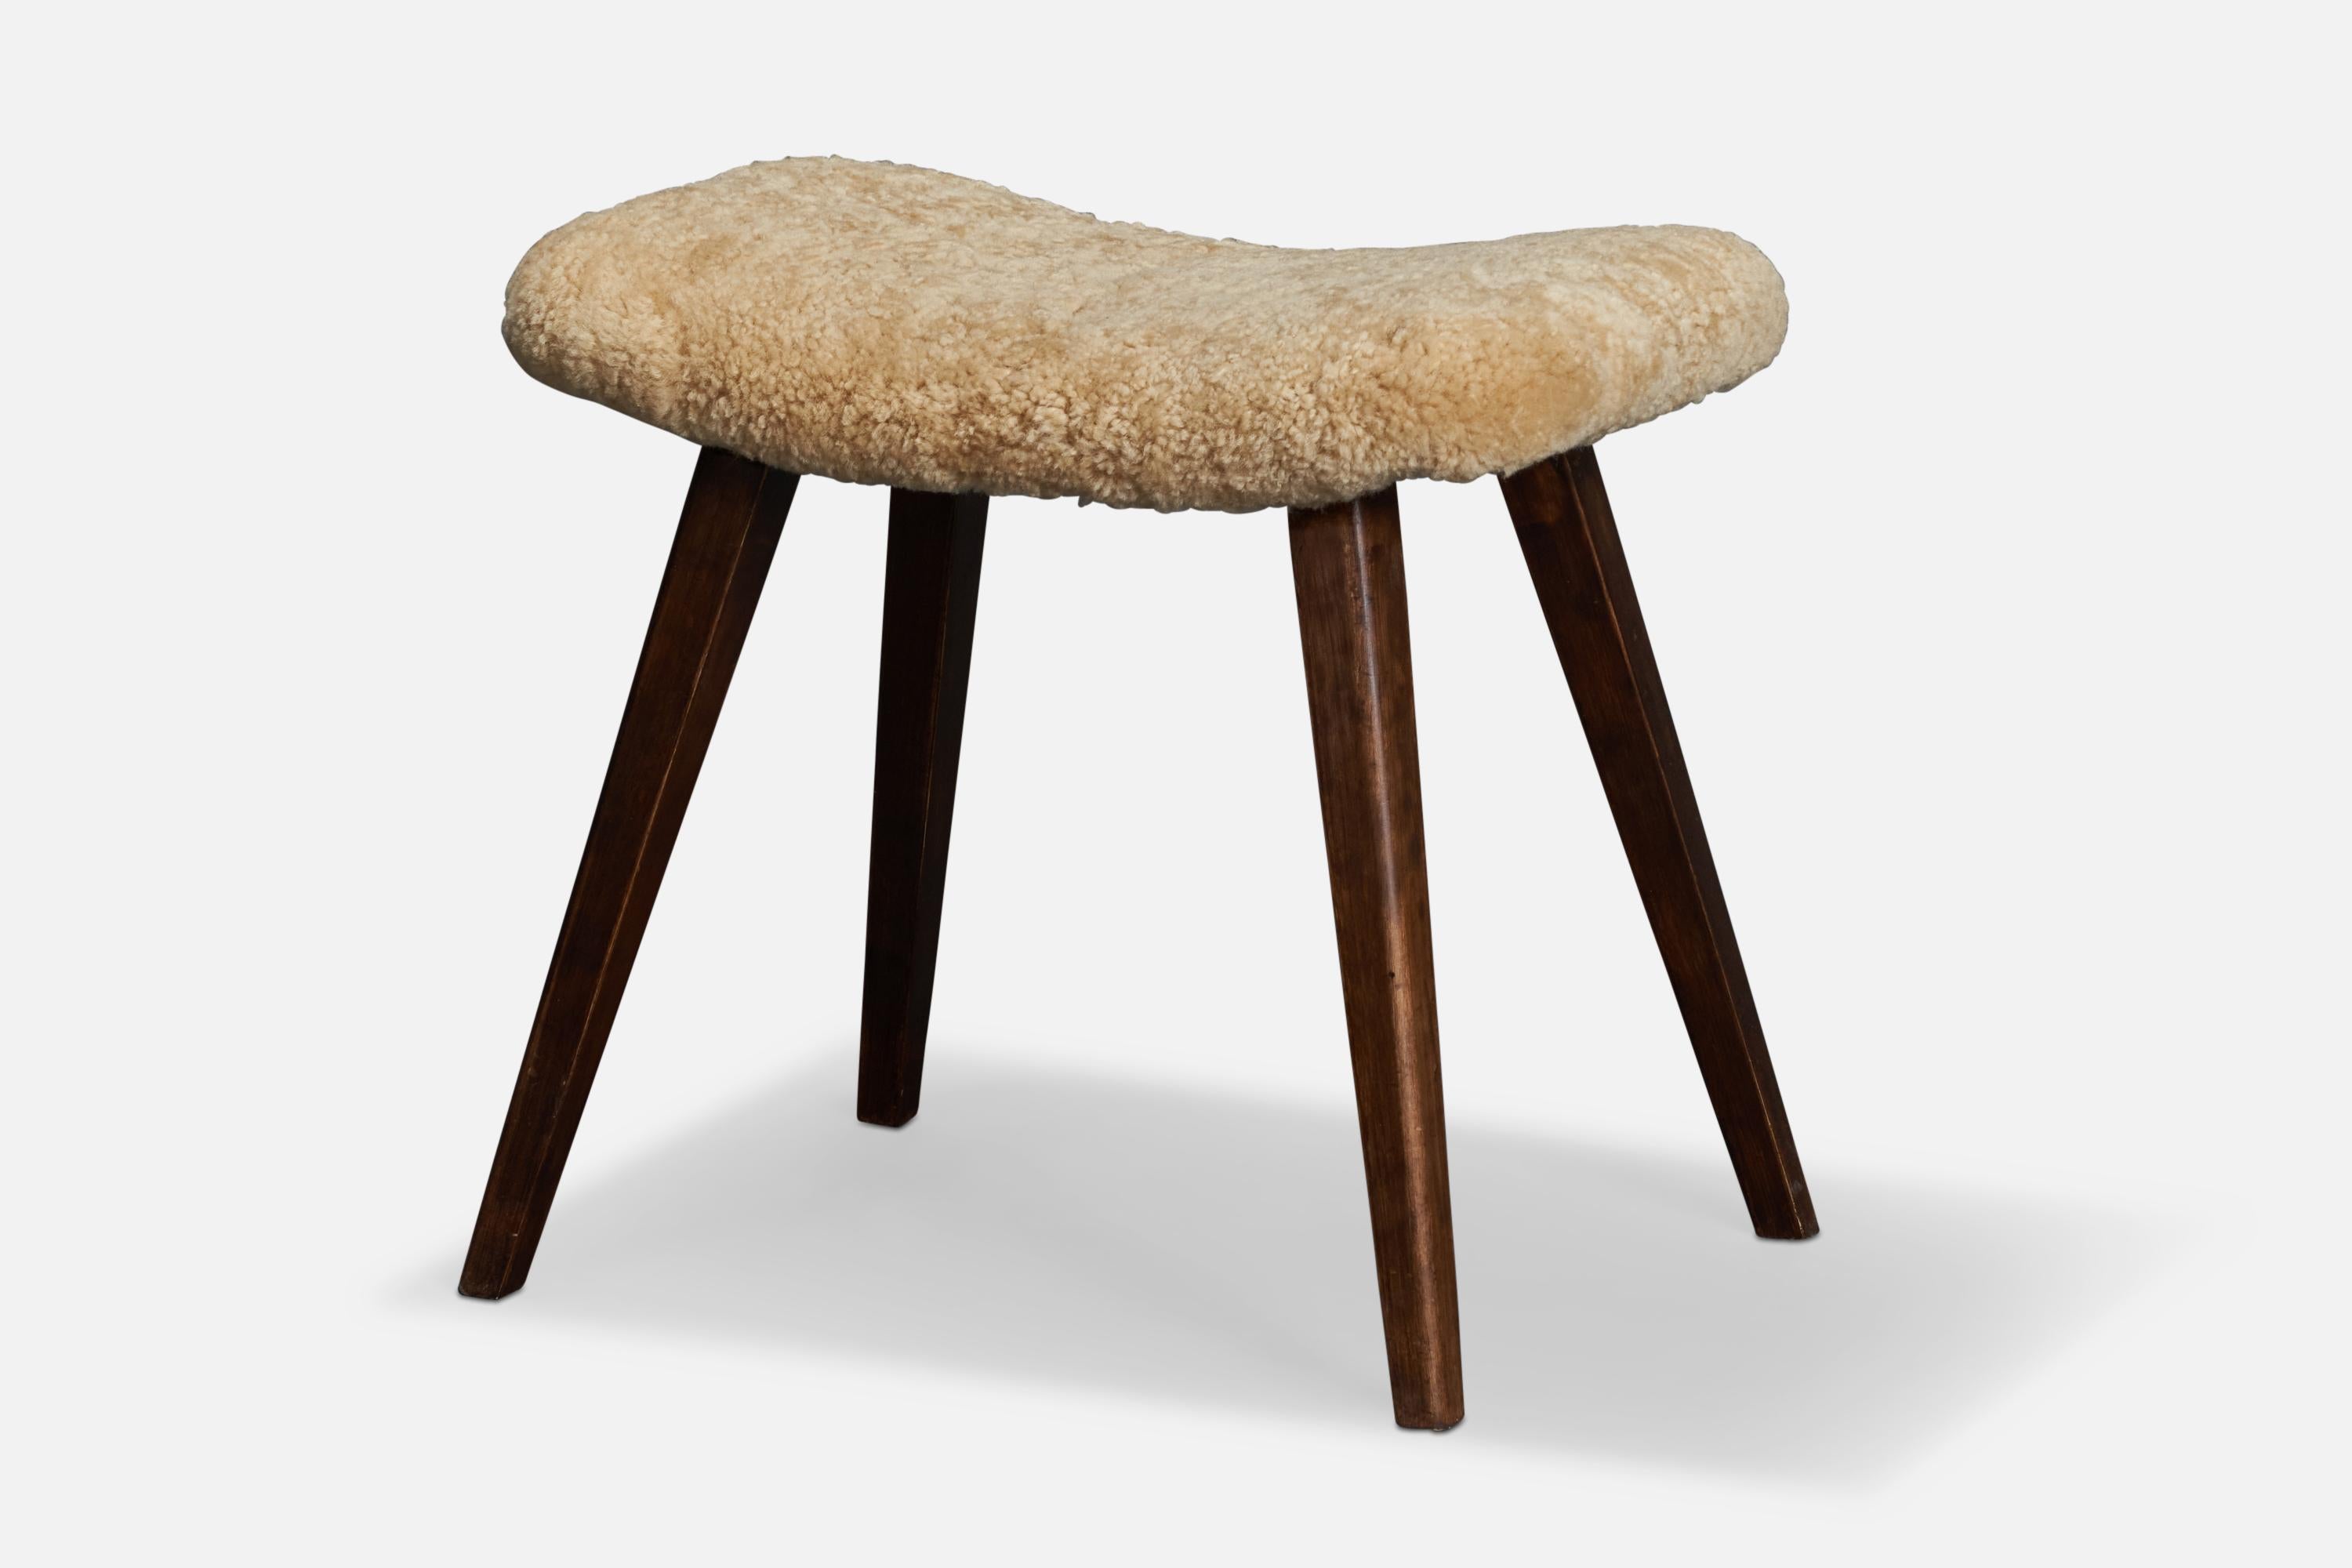 A dark-stained wood and beige shearling stool designed and produced in Sweden, 1950s.

Seat height: 19.7”